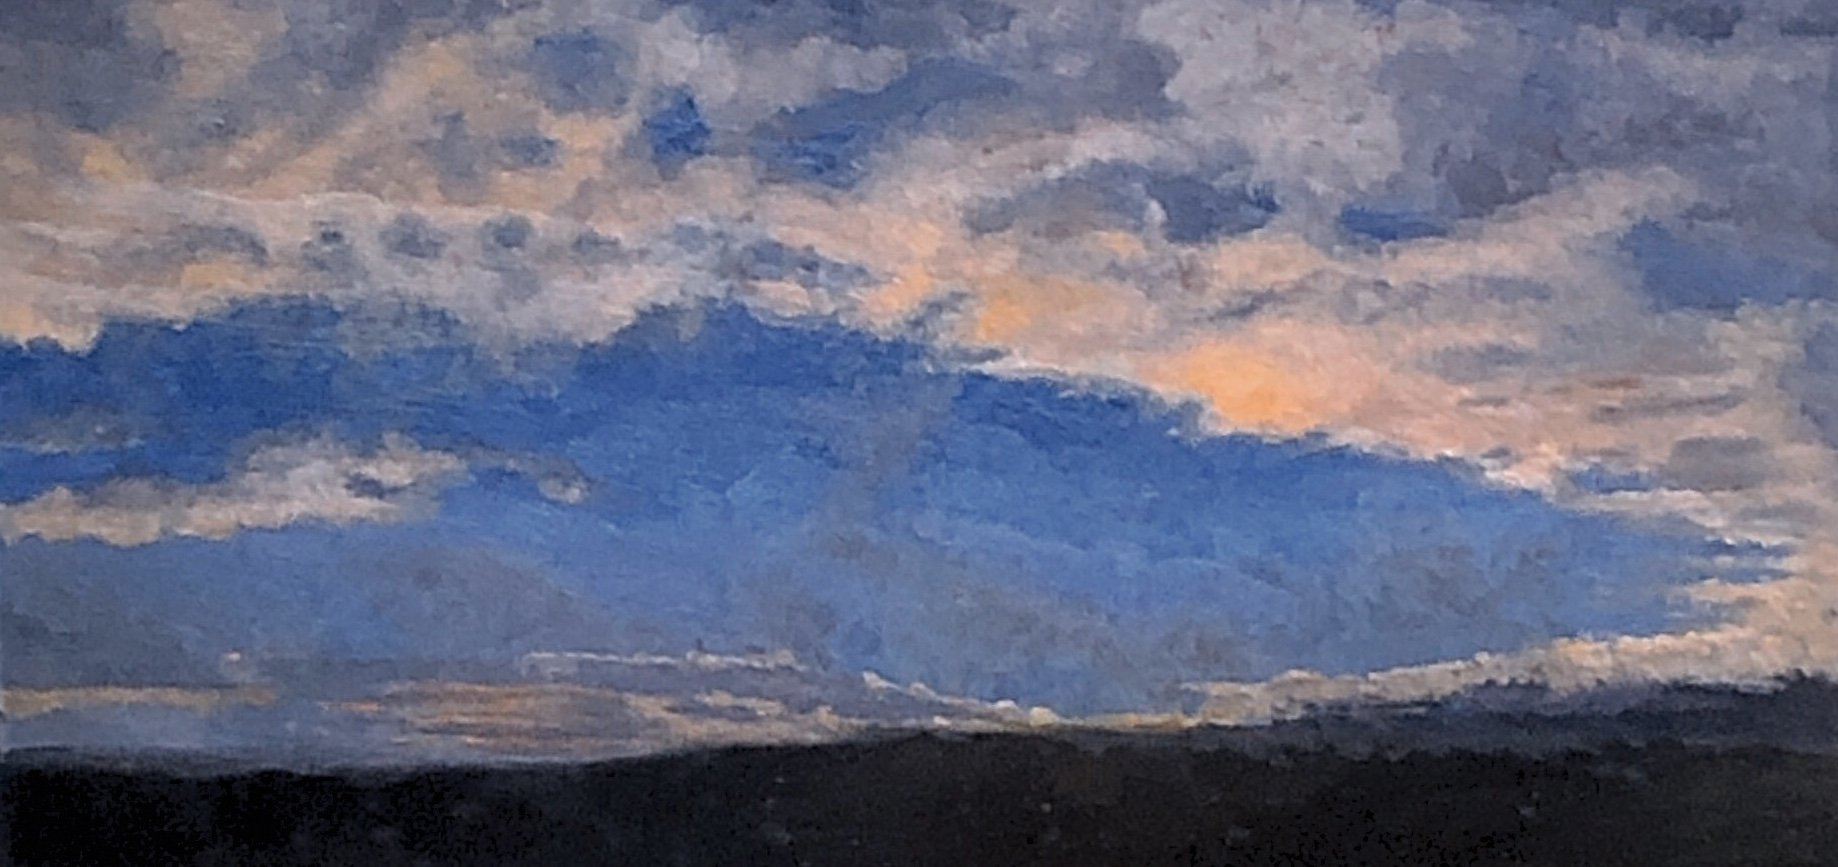 Yellow Sunset, oil on masonite 40x20cm, private collection